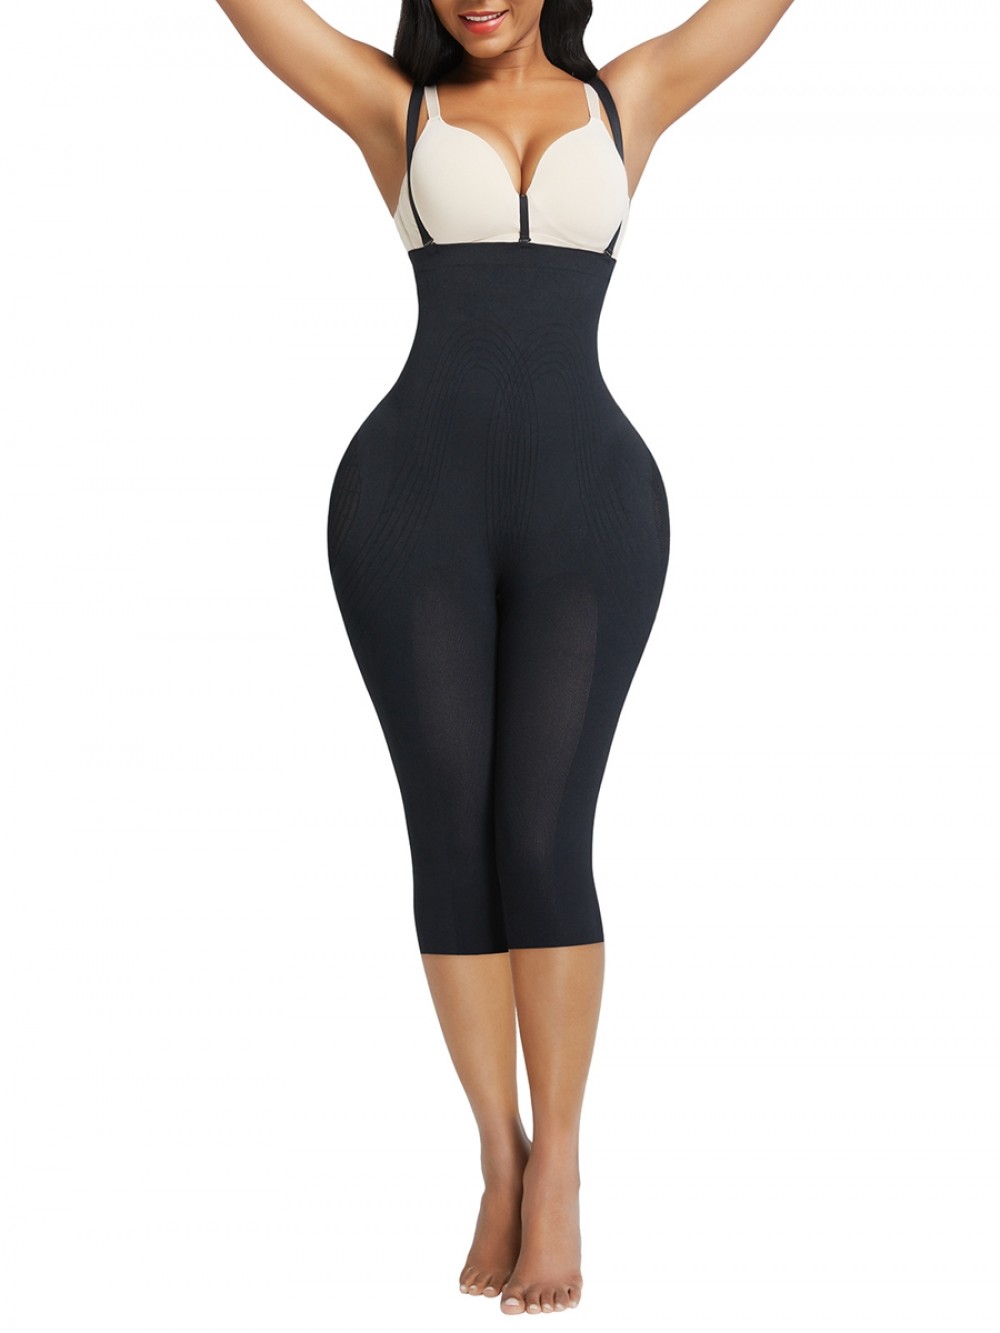 Black Plus Size Full Body Shaper With Open Crotch Smooth Silhouette